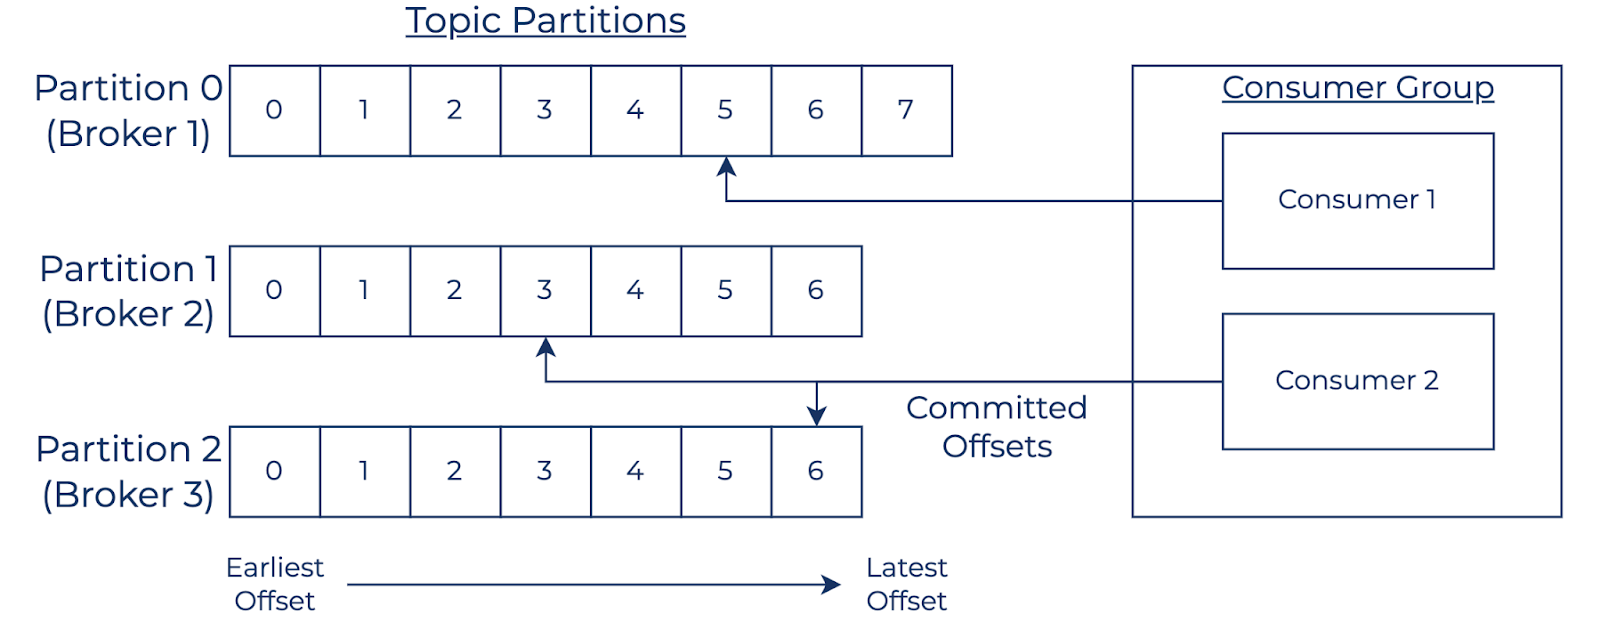 Consumer group and topic partitions